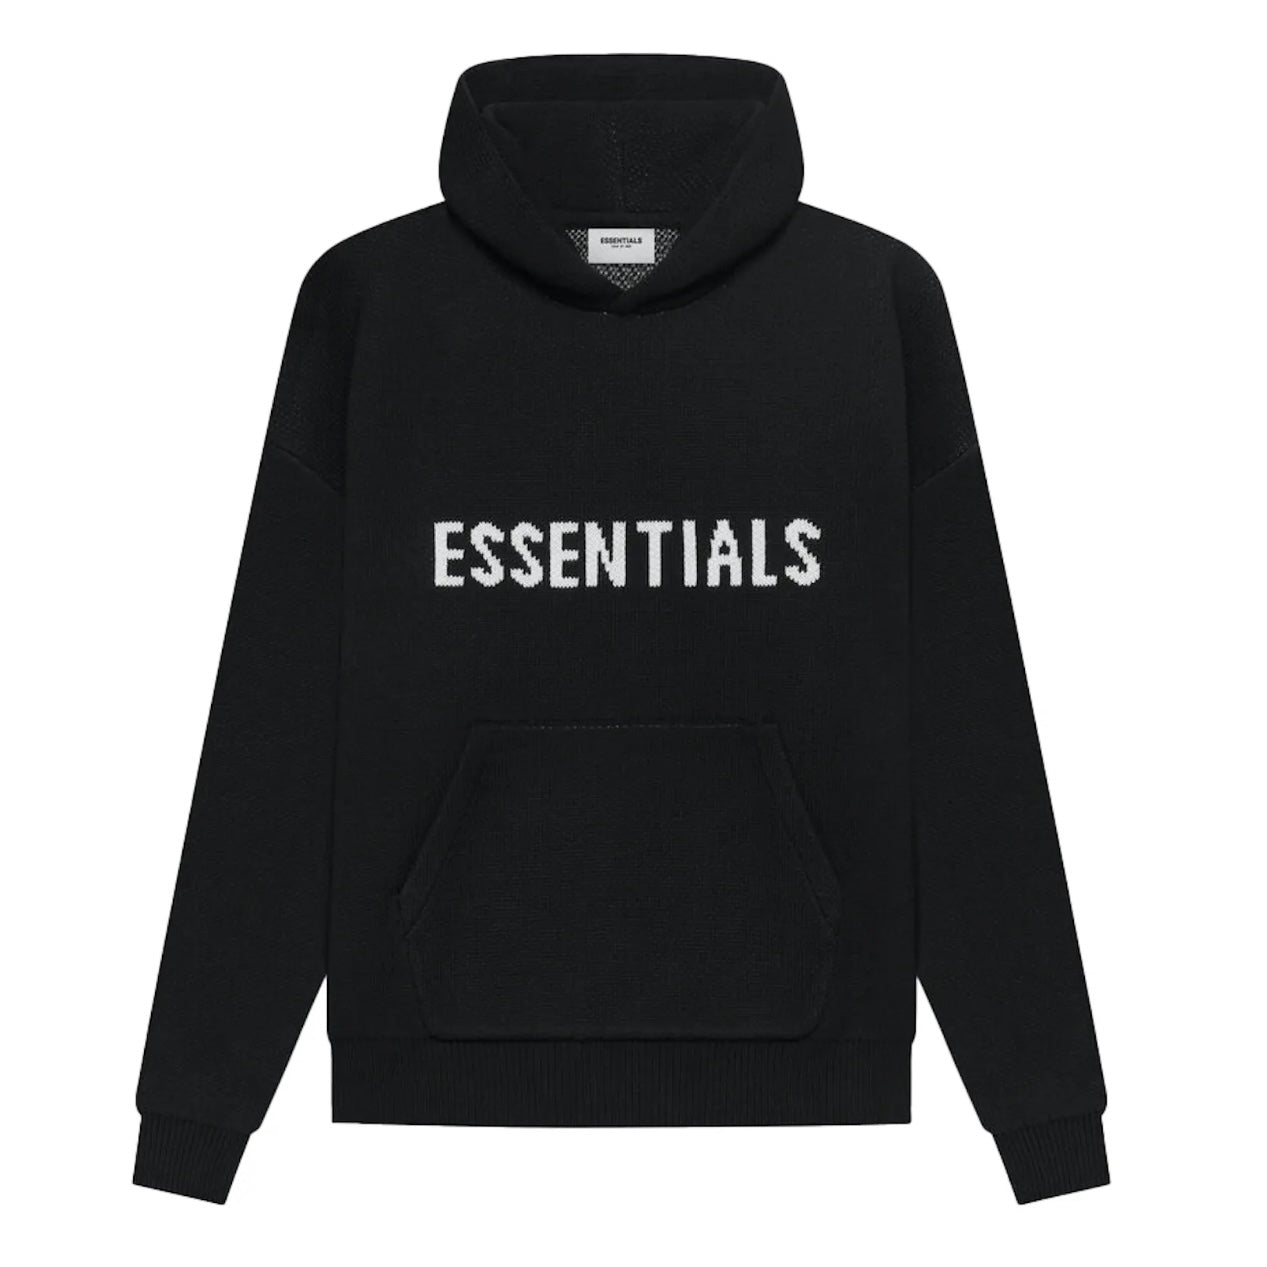 FEAR OF GOD ESSENTIALS KNIT PULLOVER - BLACK